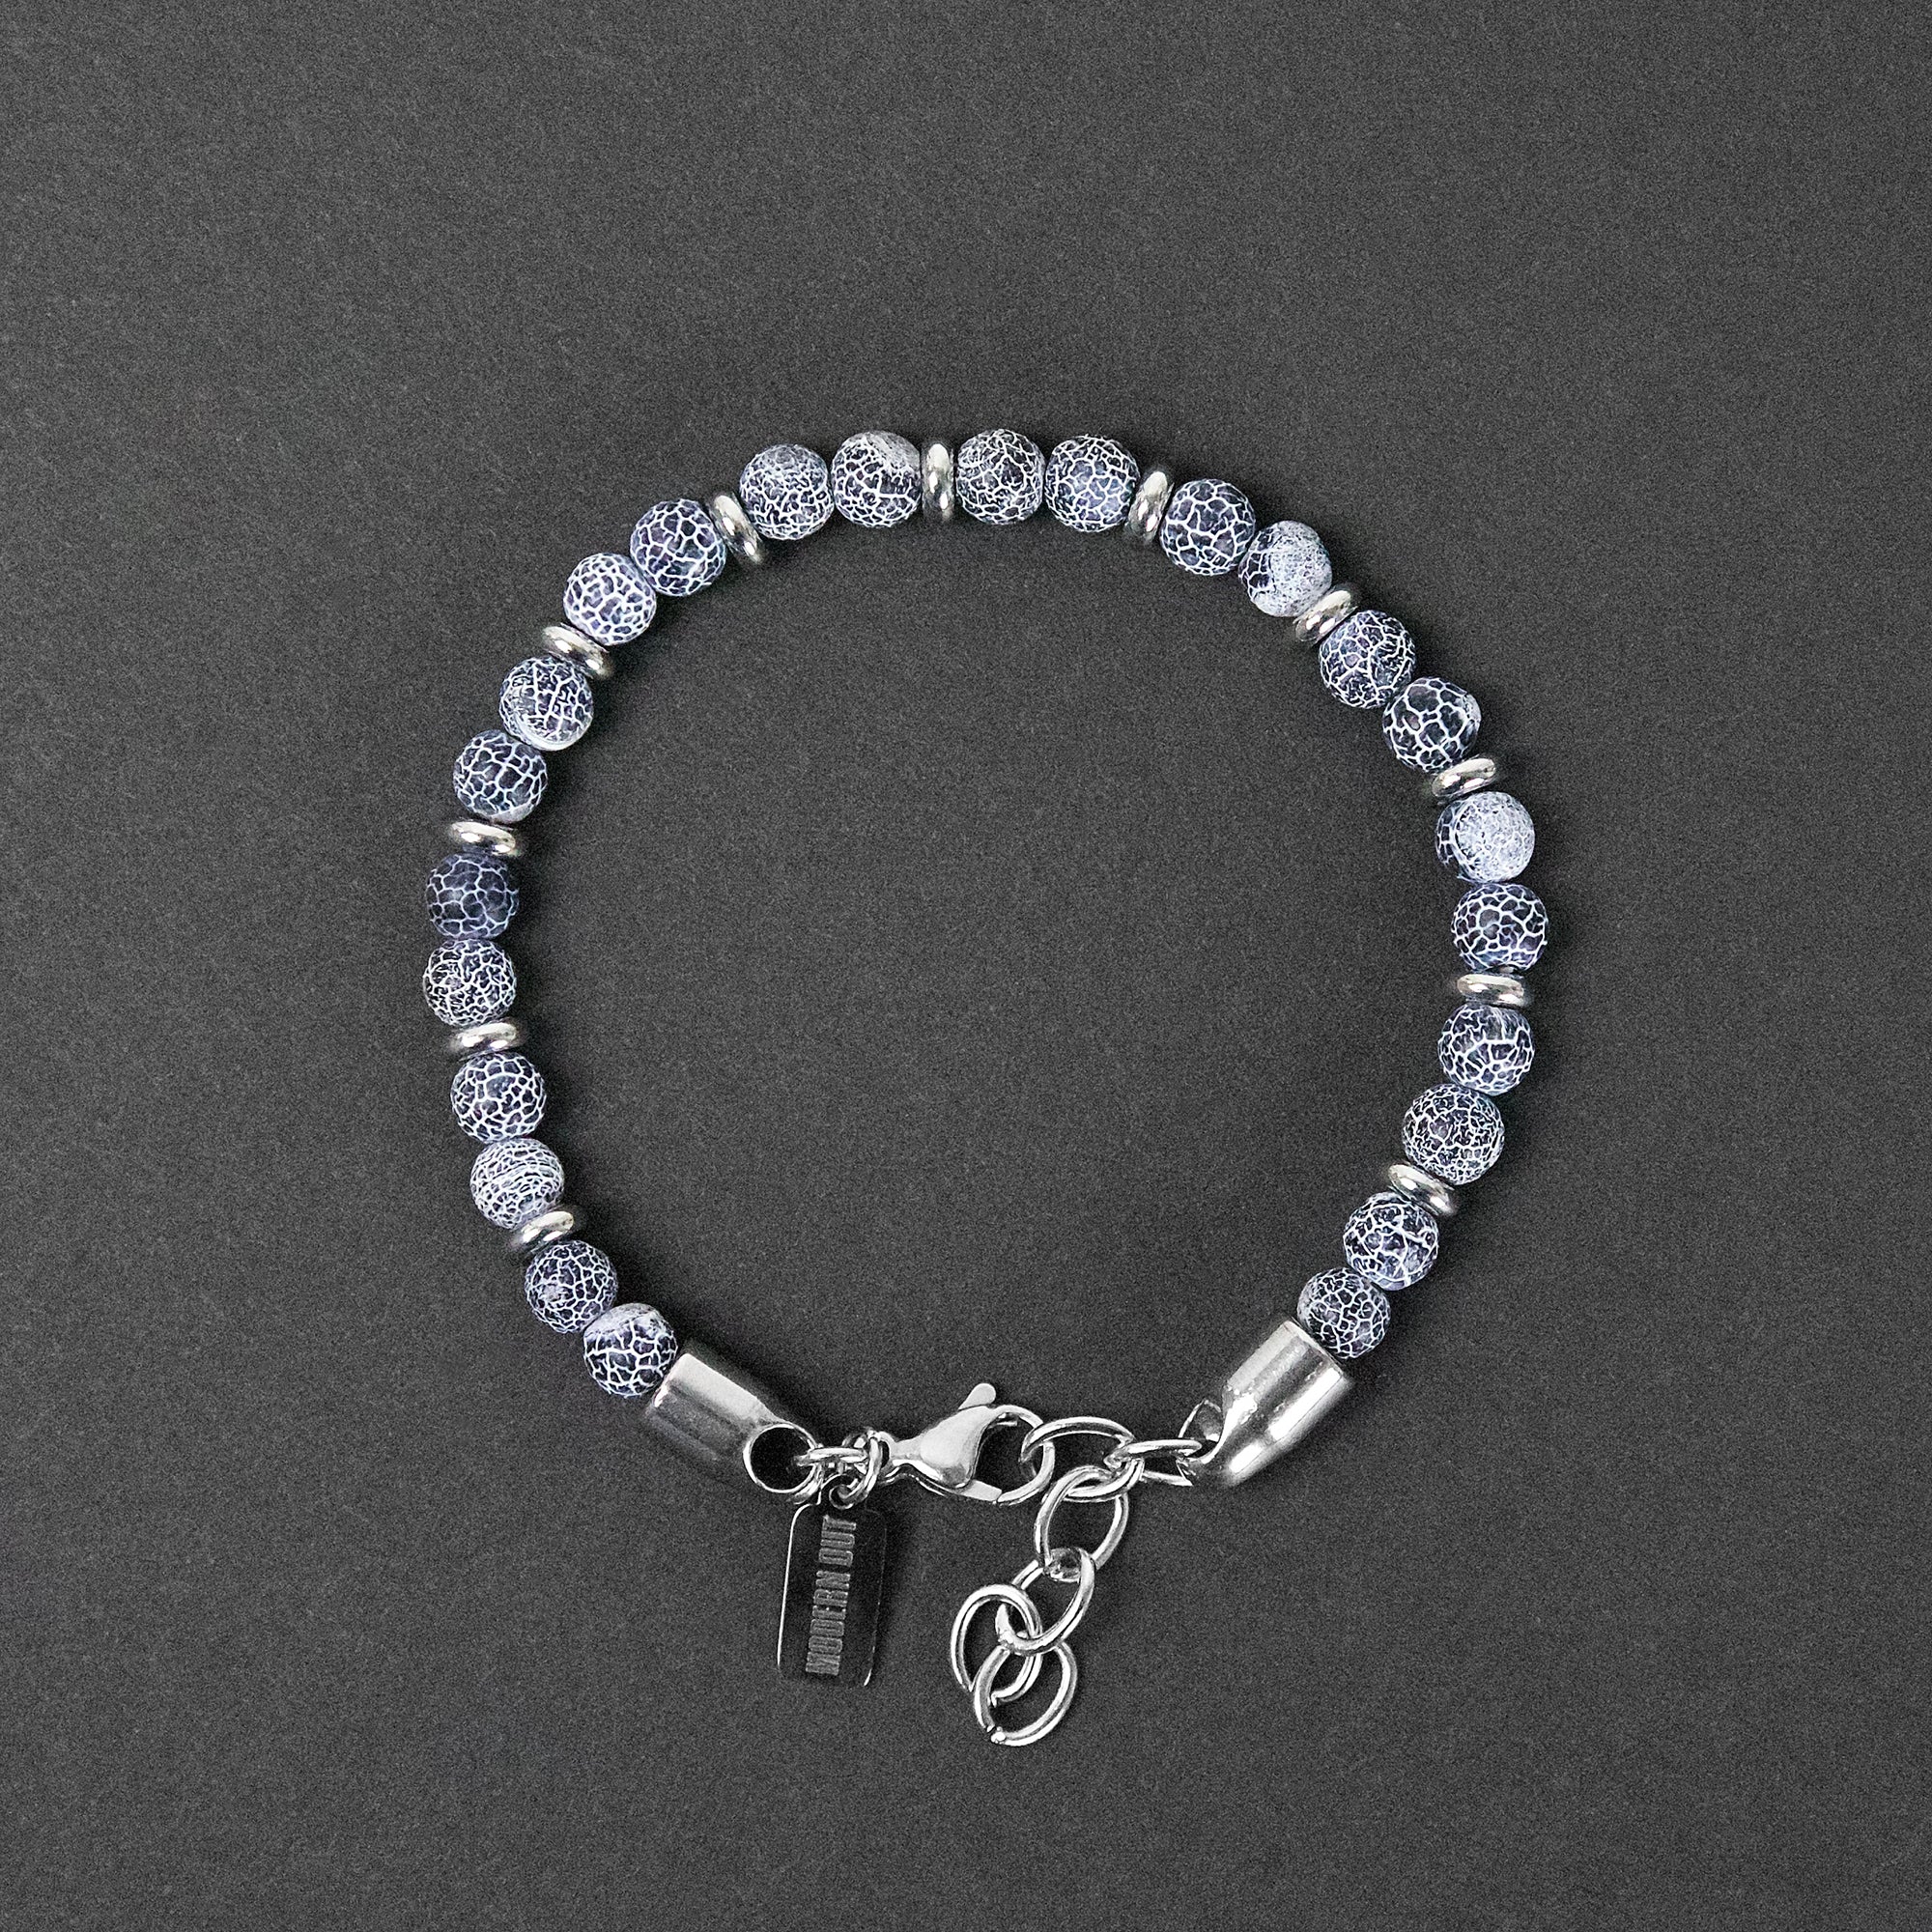 Bead Bracelet - Weathered Agate x Silver